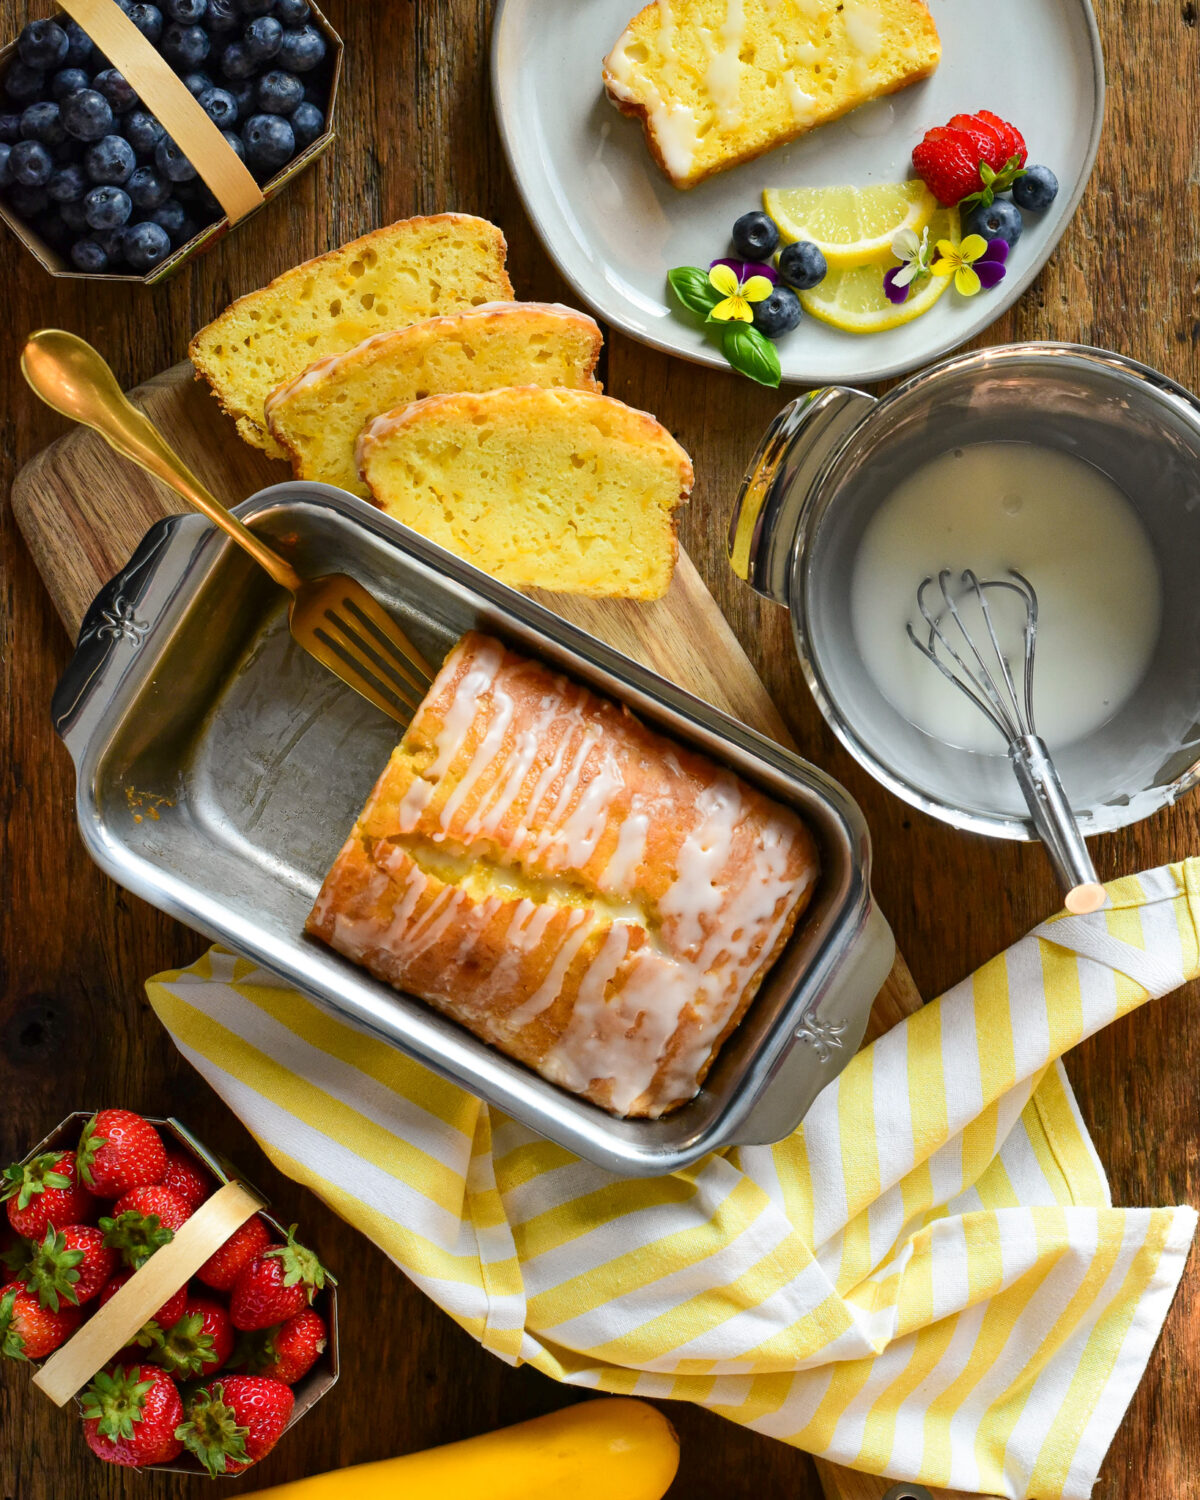 A Zucchini Lemon Loaf sliced with glaze. Served with fresh fruit and edible flowers.